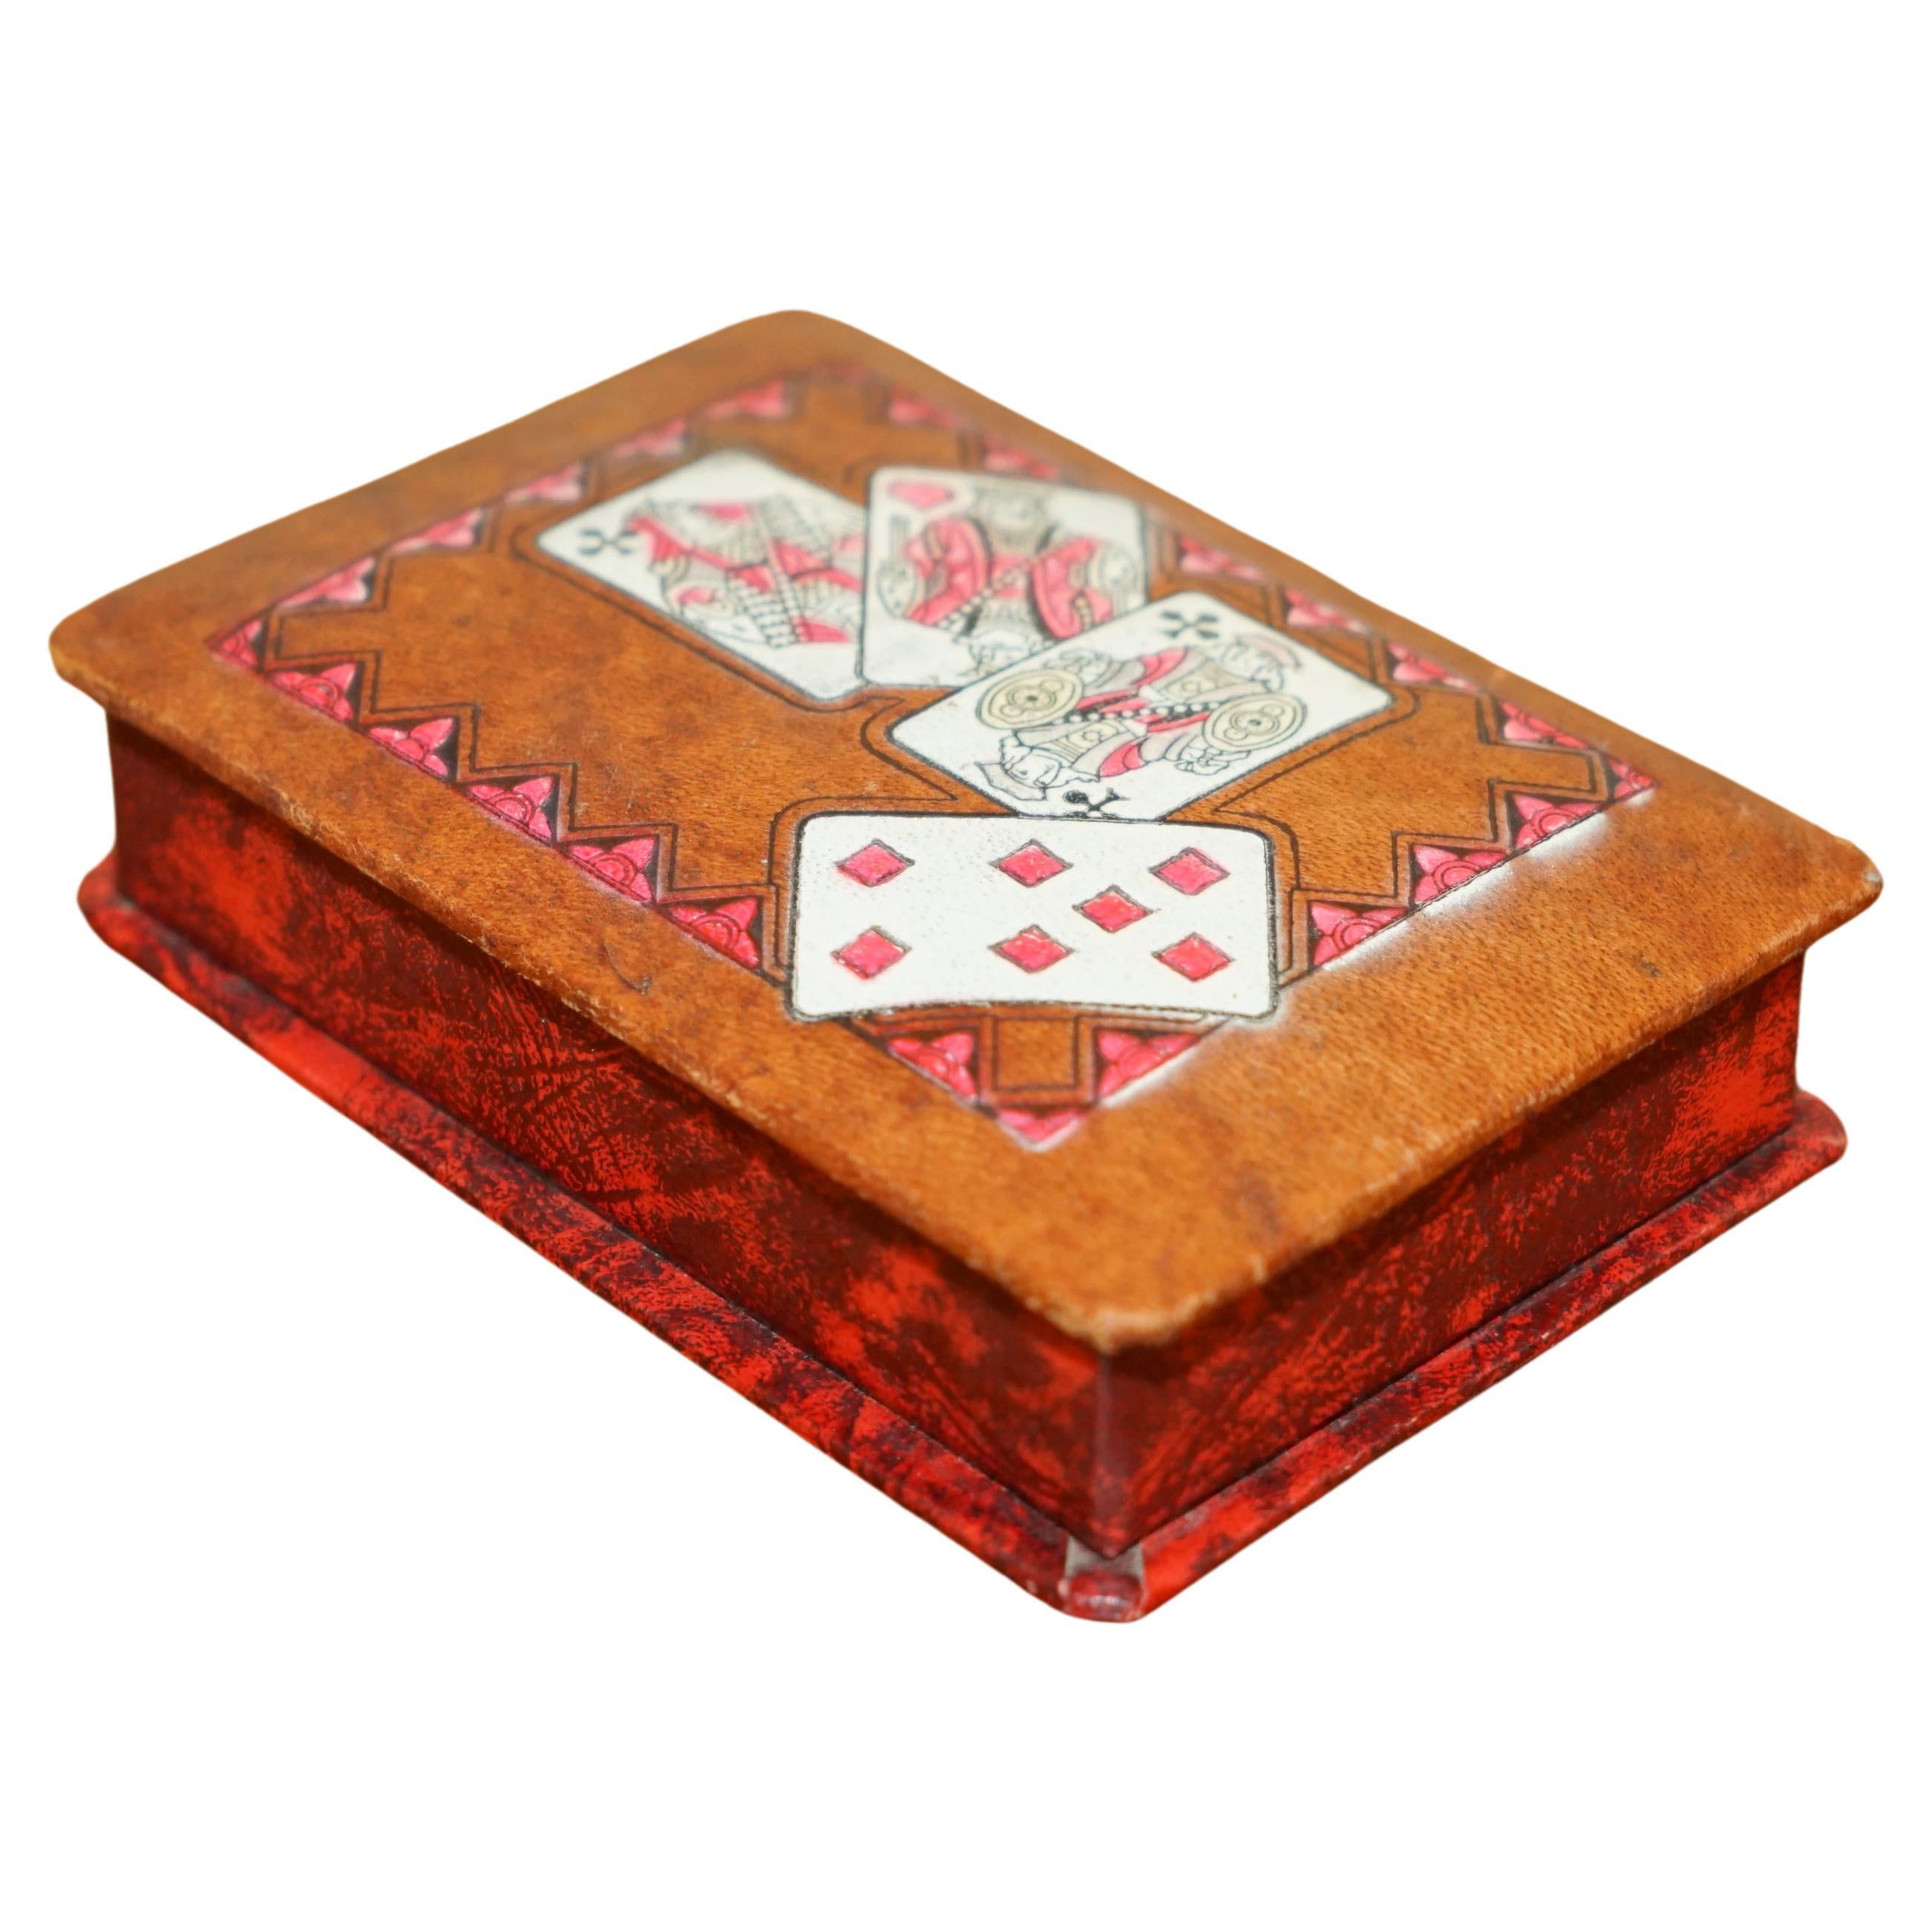 Royal House Antiques

Royal House Antiques is delighted to offer for sale this super collectable antique Napoleon III leather embossed and hand painted card games box

A very good looking and decorative little box, the top is embossed leather which